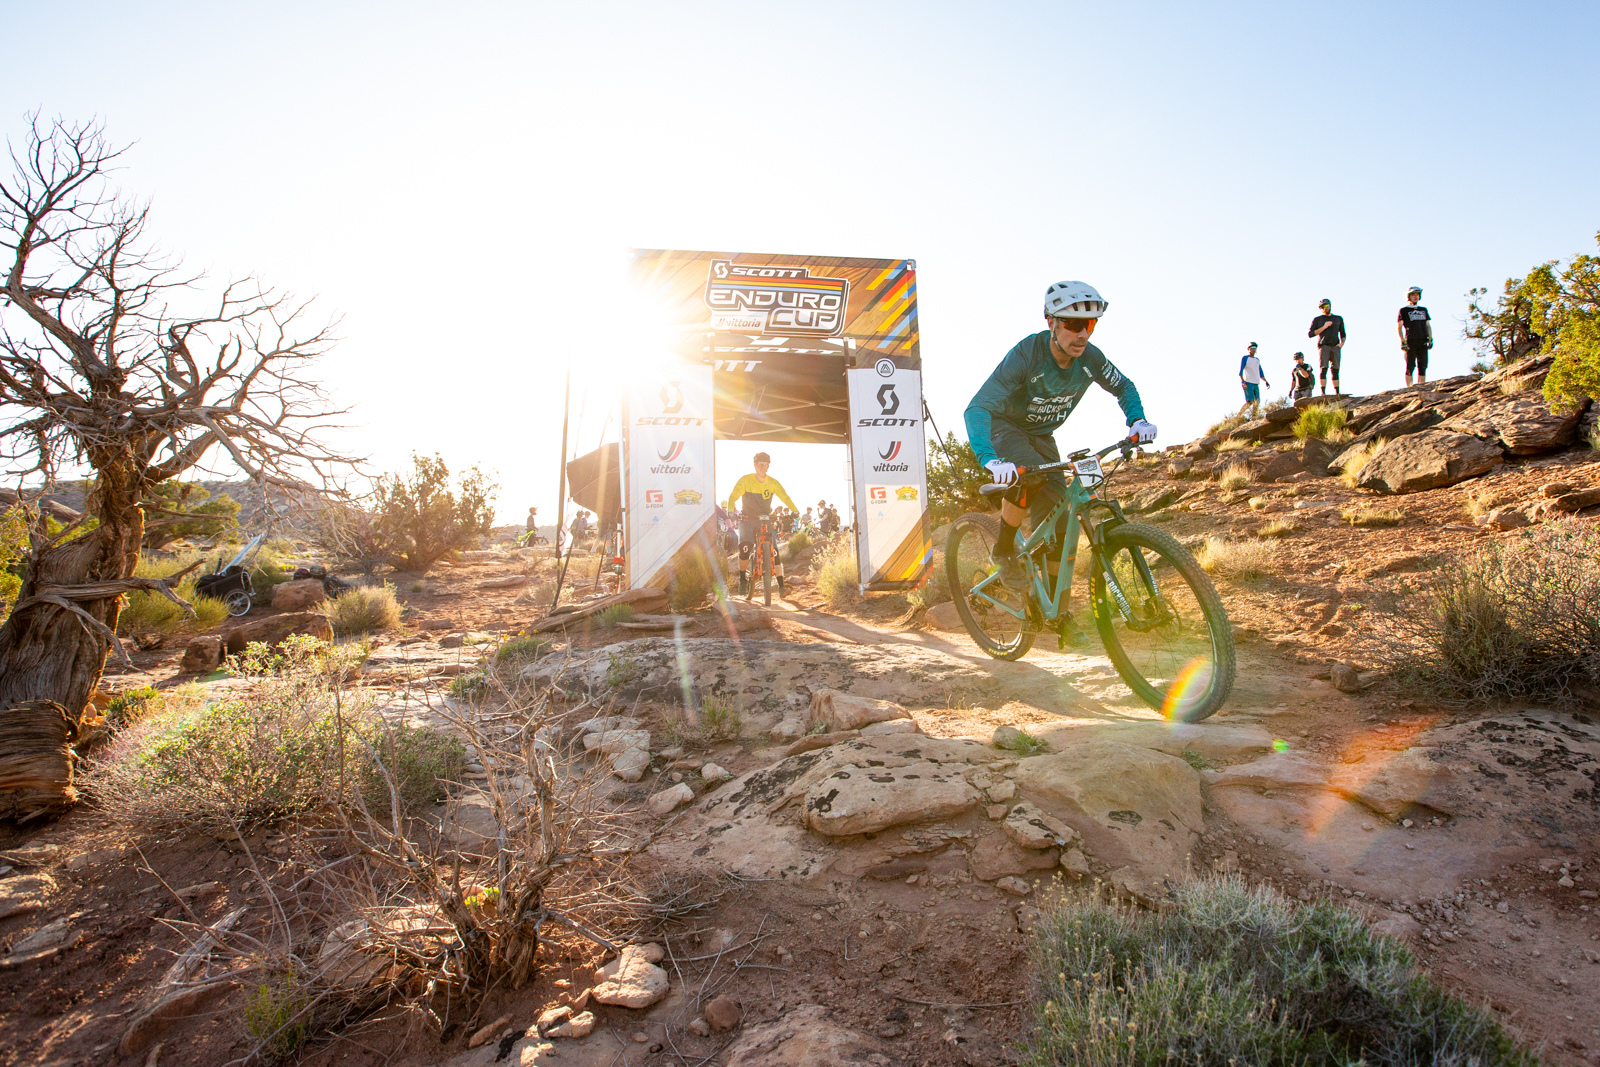 Nate Hills races stage 1 at Round 1 of the 2018 SCOTT Enduro Cup presented by Vittoria in Moab, UT on May 5, 2018. Photographer: Sean Ryan / EnduroCupMTB